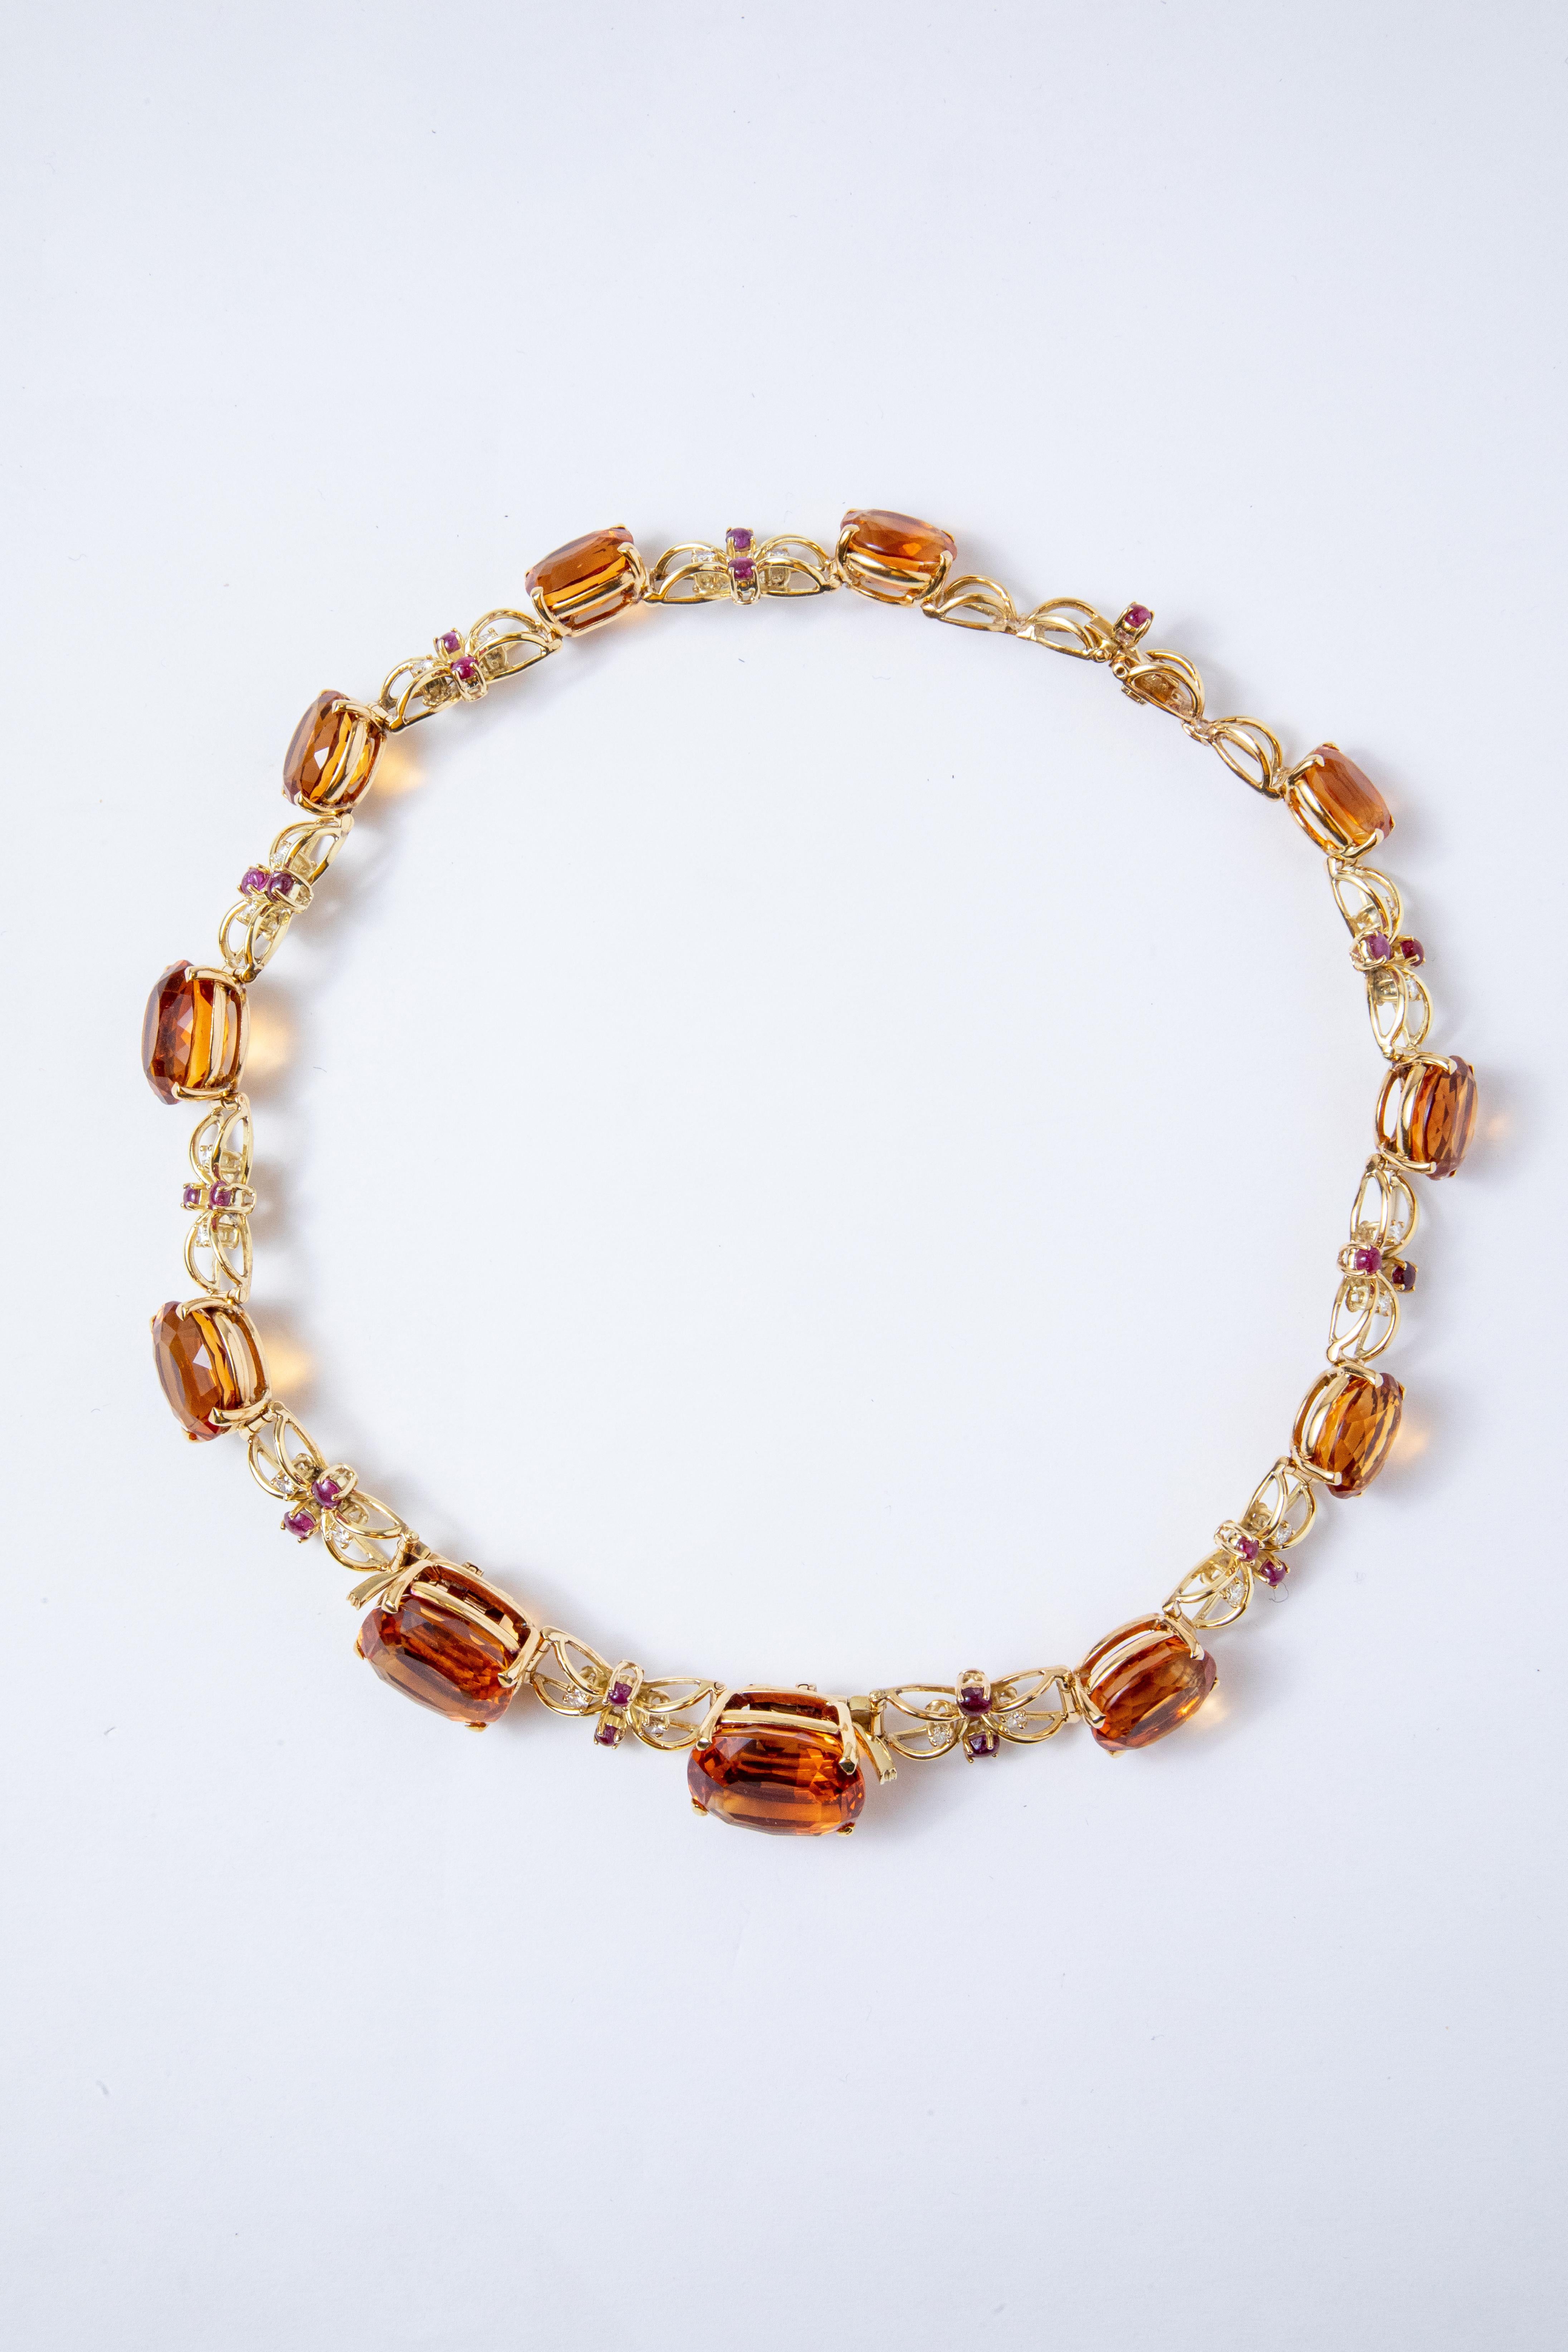 Semi-rigid choker necklace made in yellow gold with large oval-cut quartz (Citrines) alternating with intertwined links centered by two cabochon-cut rubies and two brilliant-cut diamonds.

The necklace can be divided into two bracelets and a